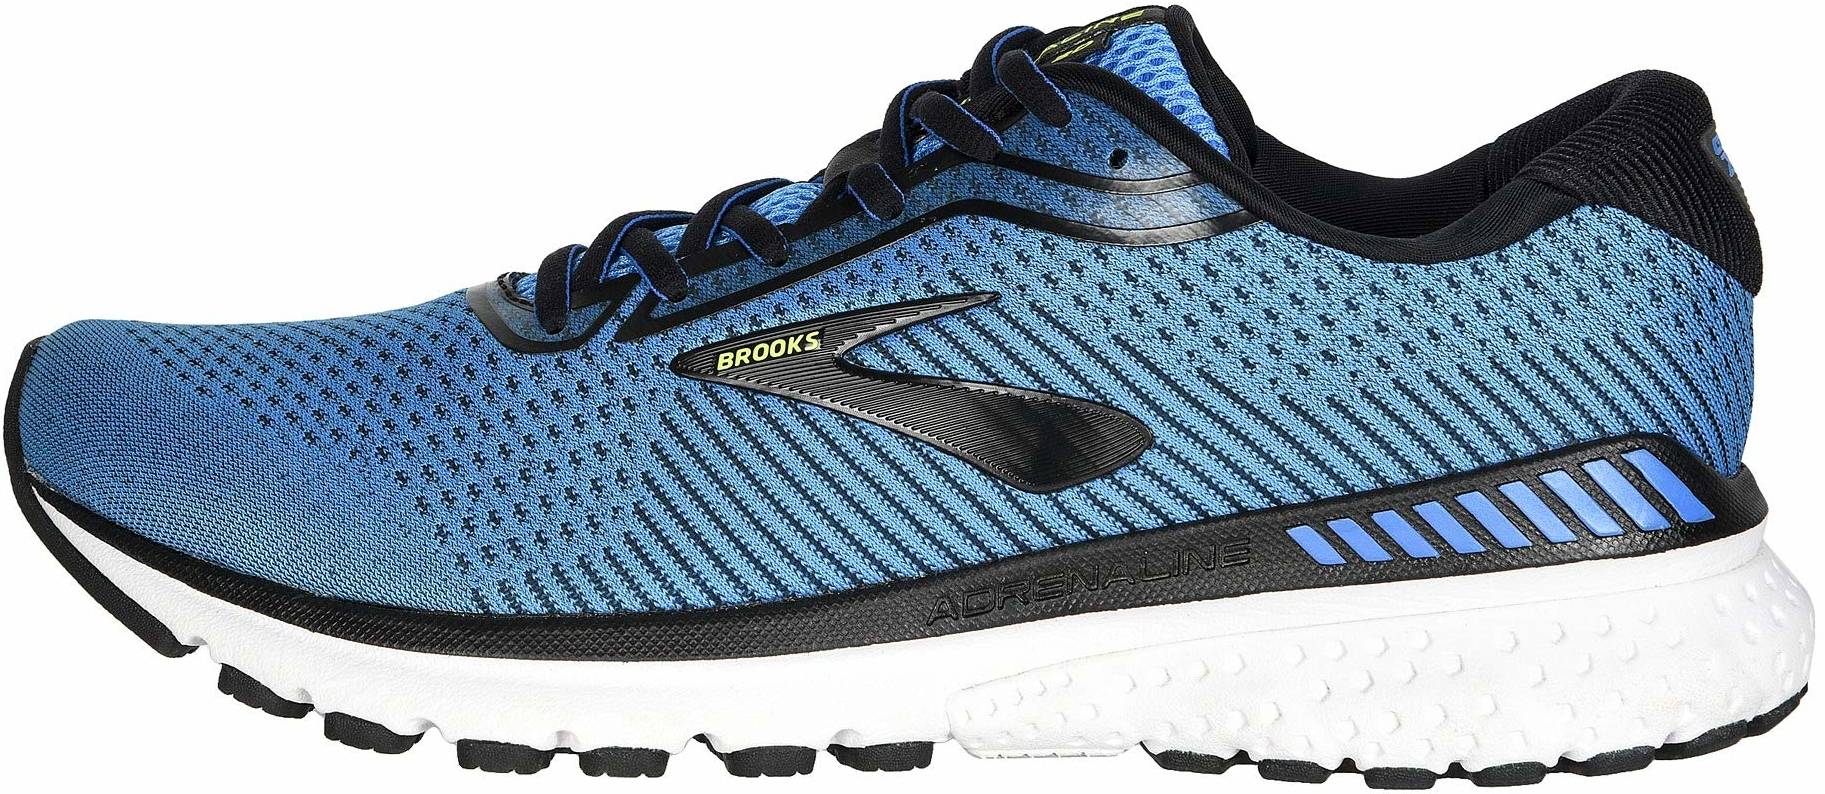 Save 30% on Blue Brooks Running Shoes 